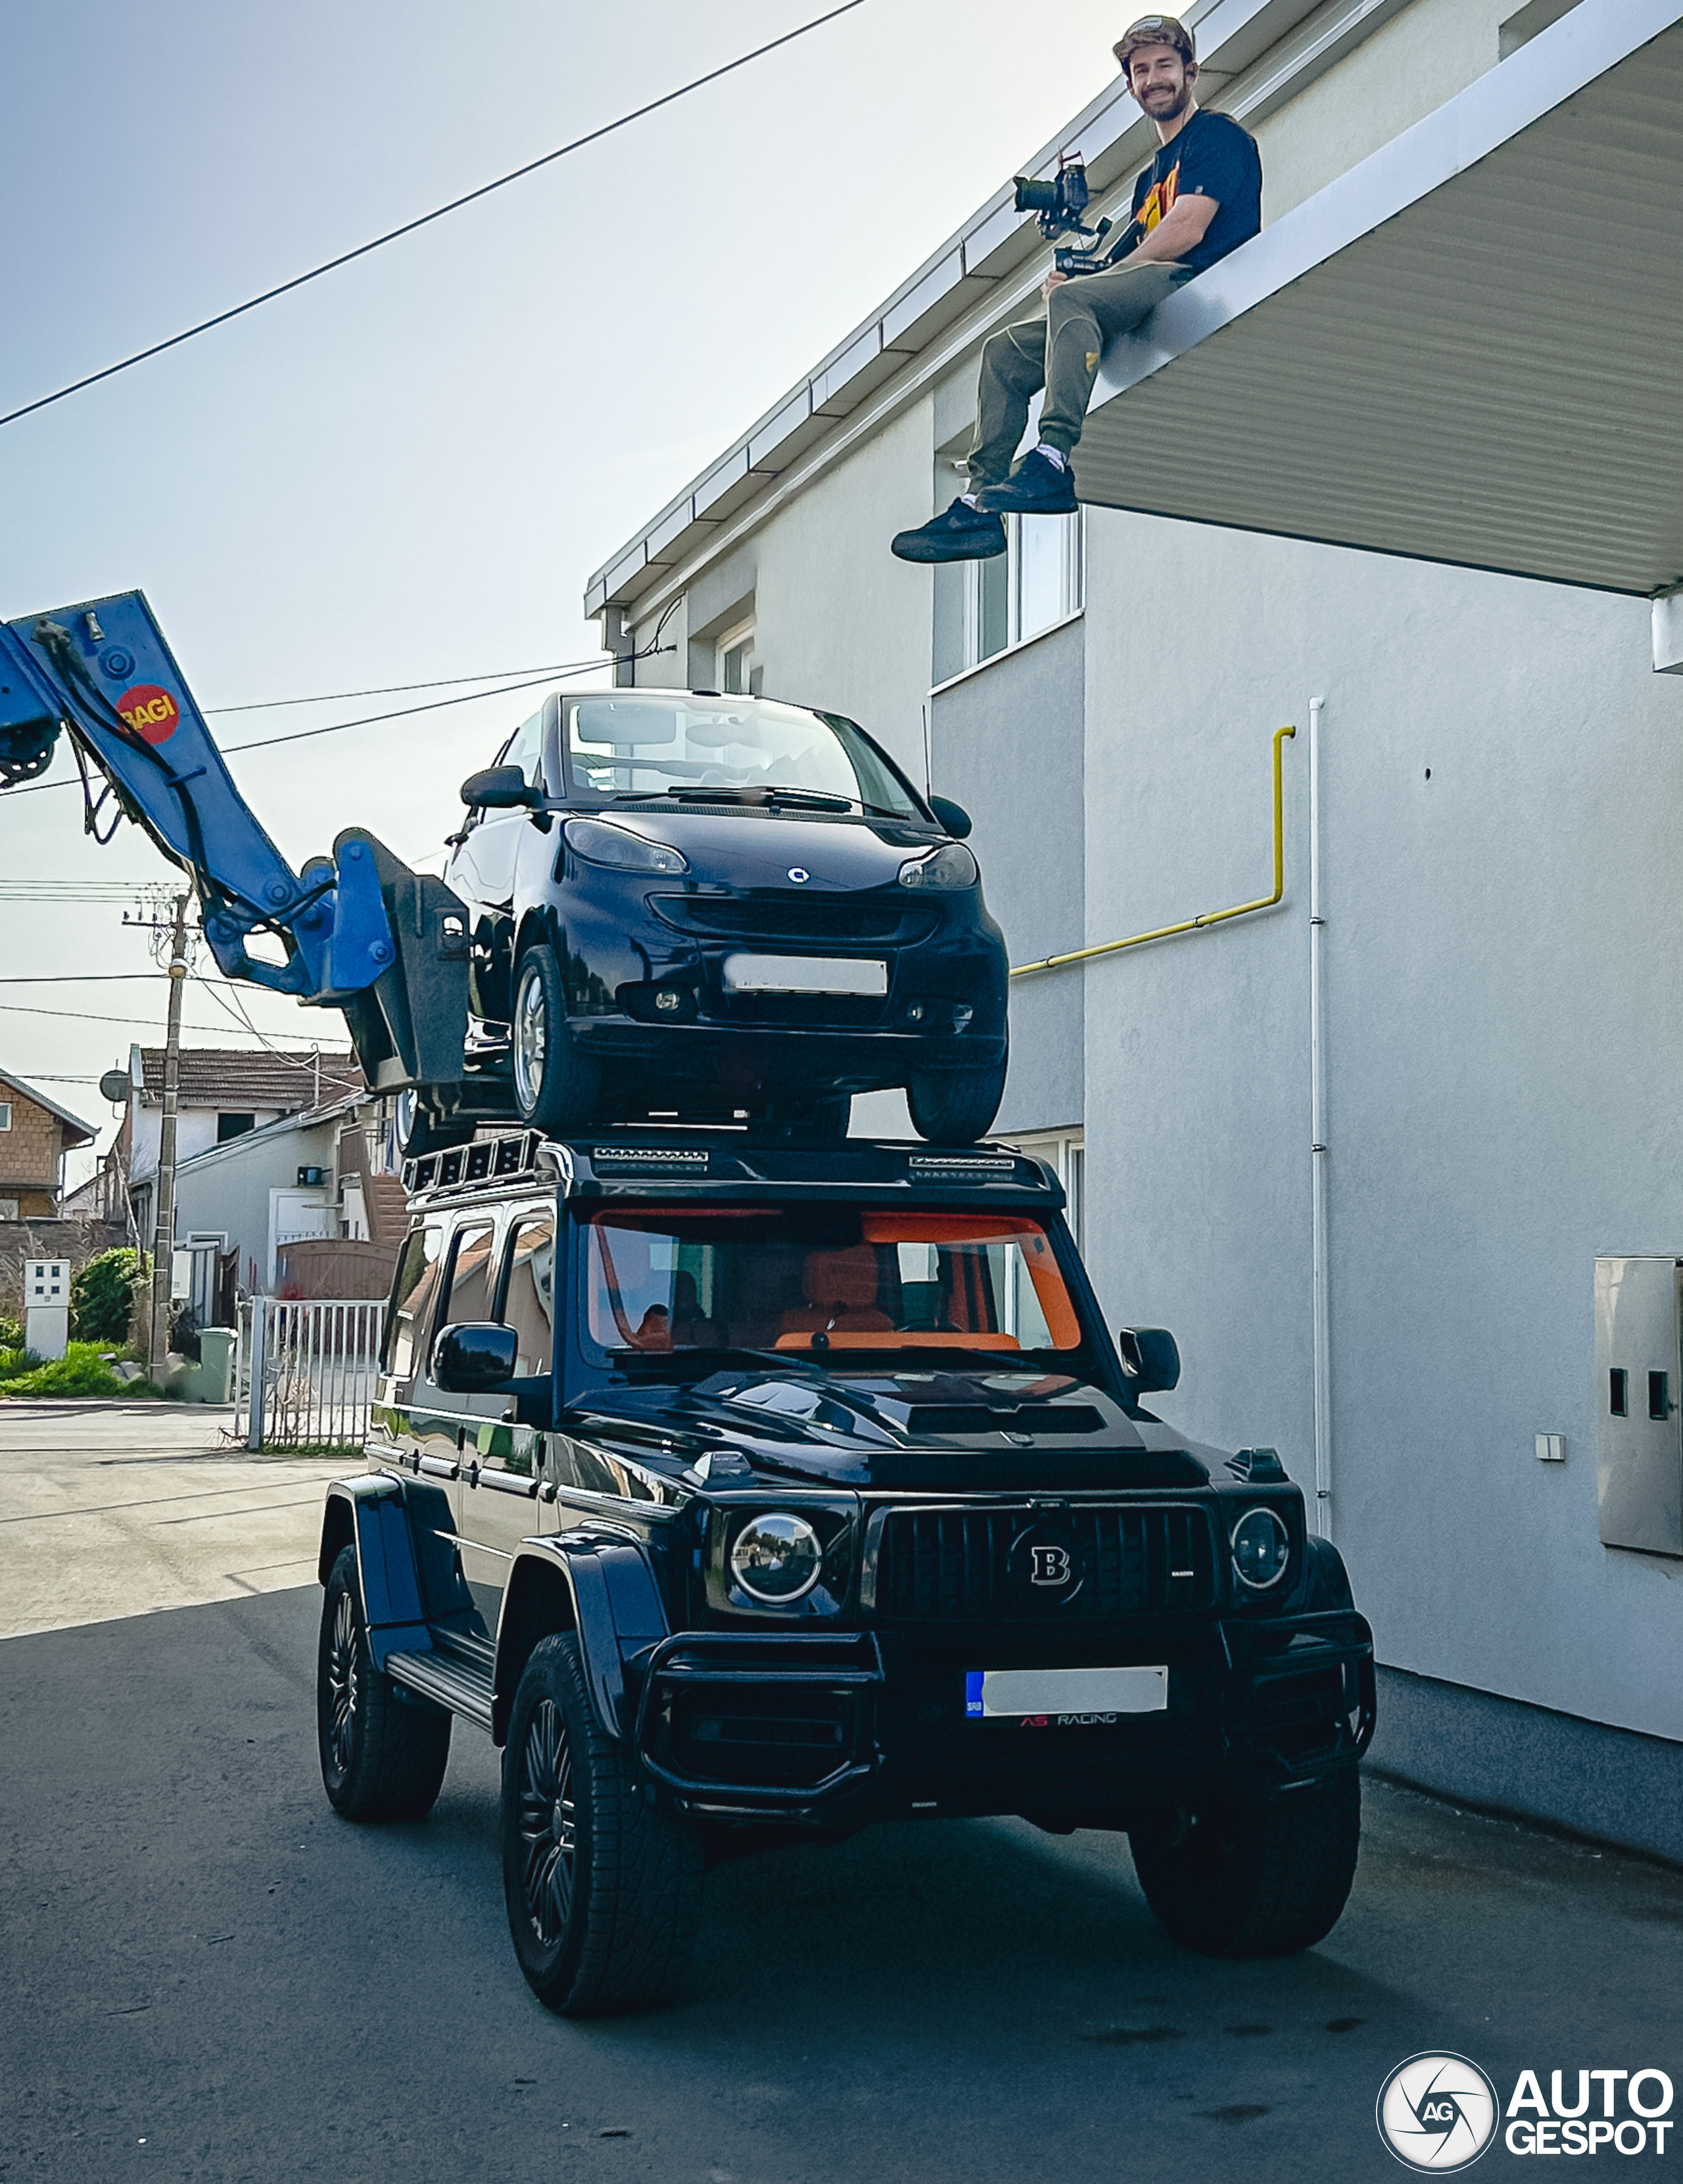 Smart Idea or just for show? G-Wagon sports Smart car as rooftop accessory